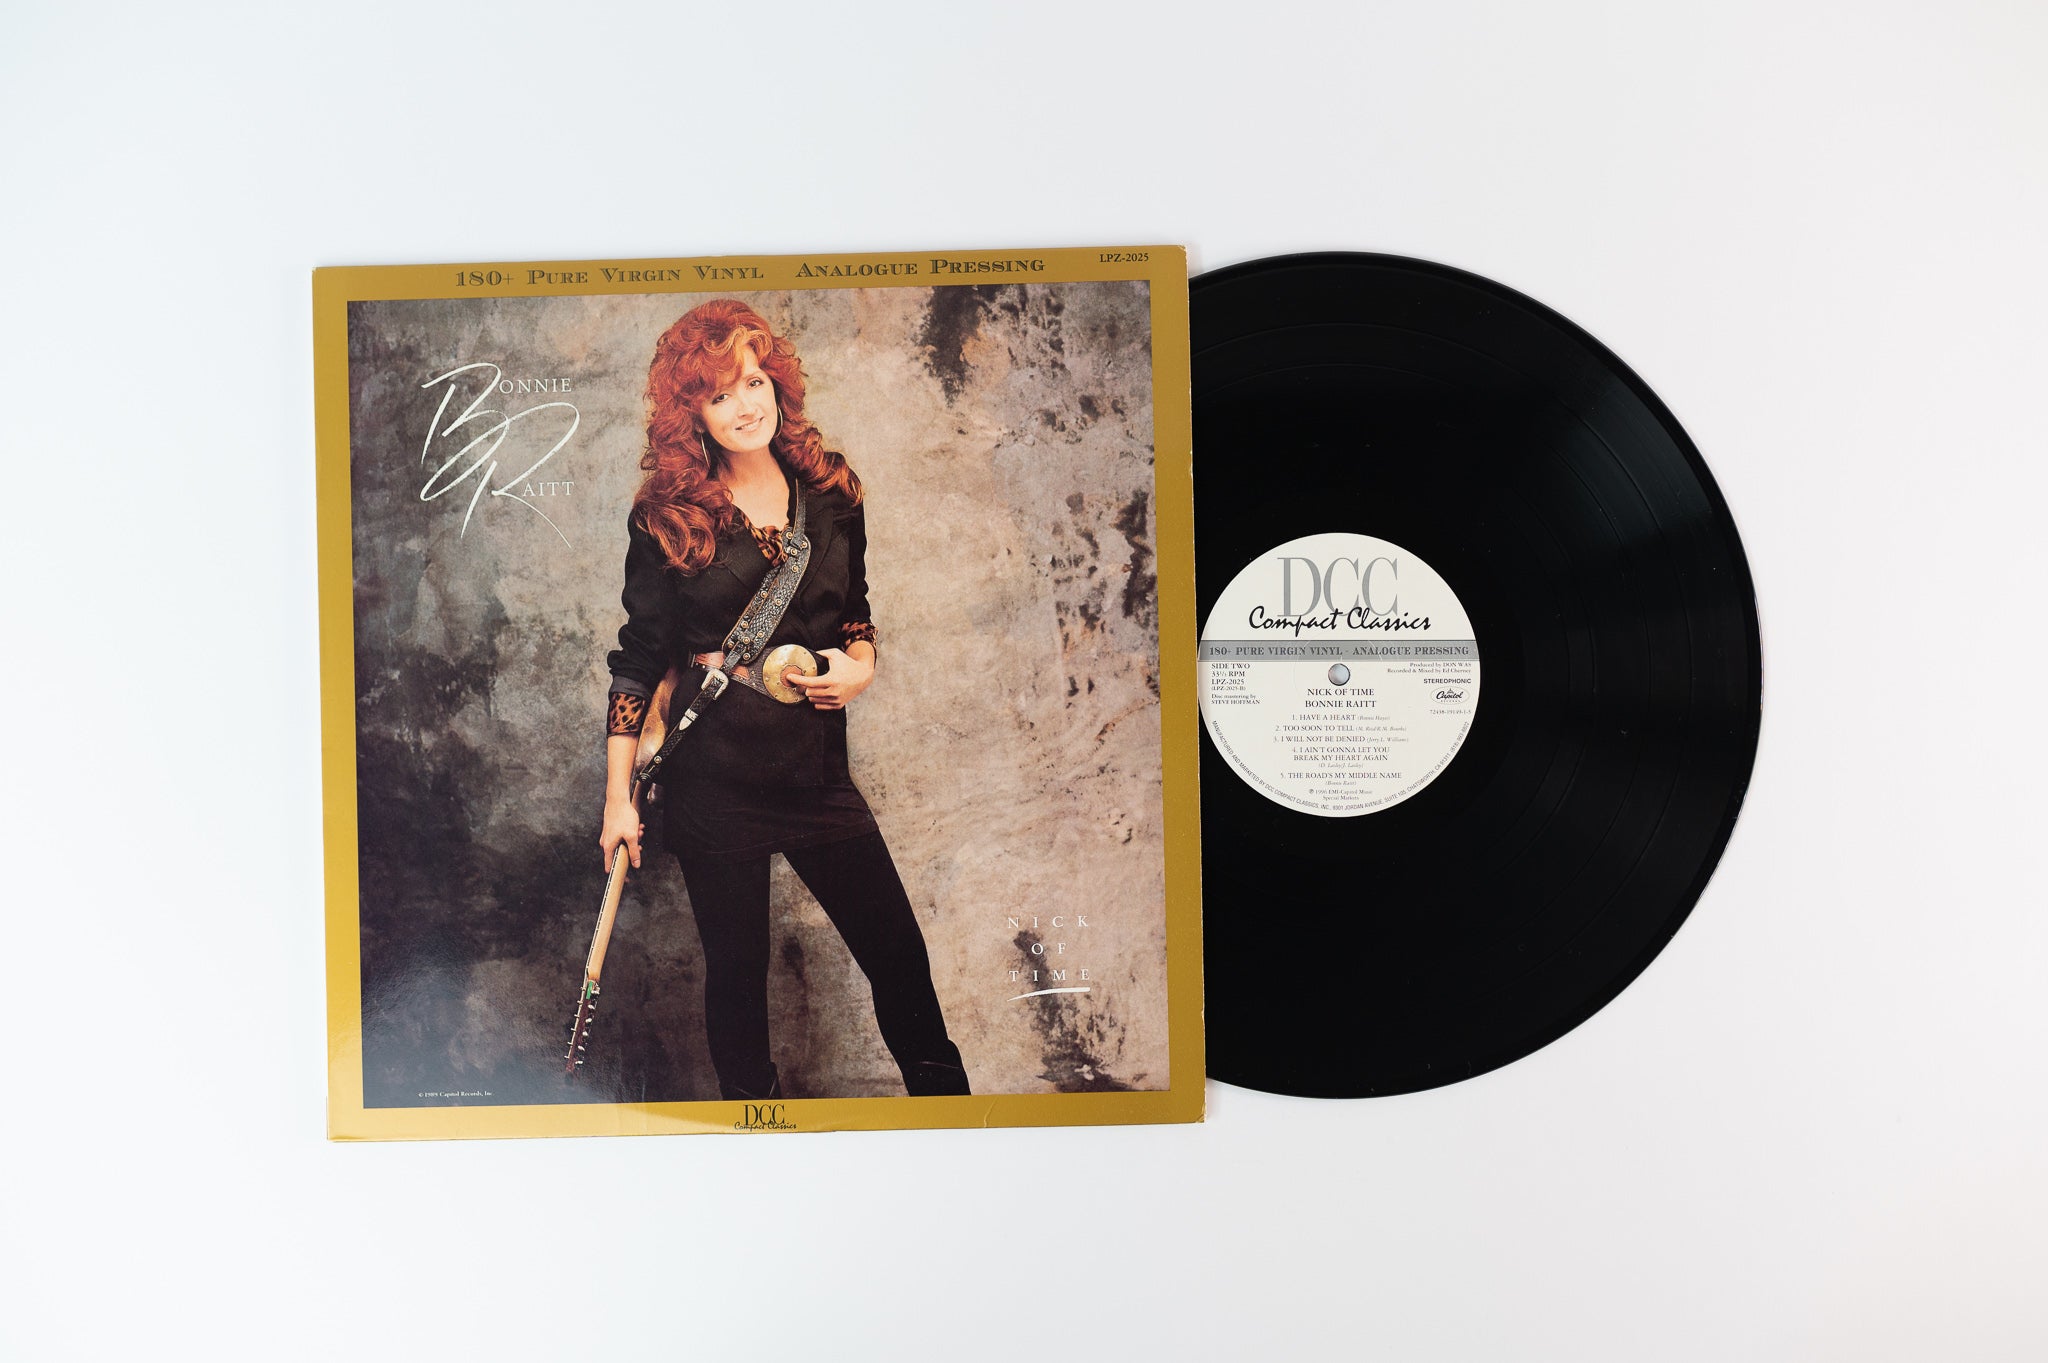 Bonnie Raitt - Nick Of Time on DCC Compact Classics Limited Numbered 180 Gram Reissue